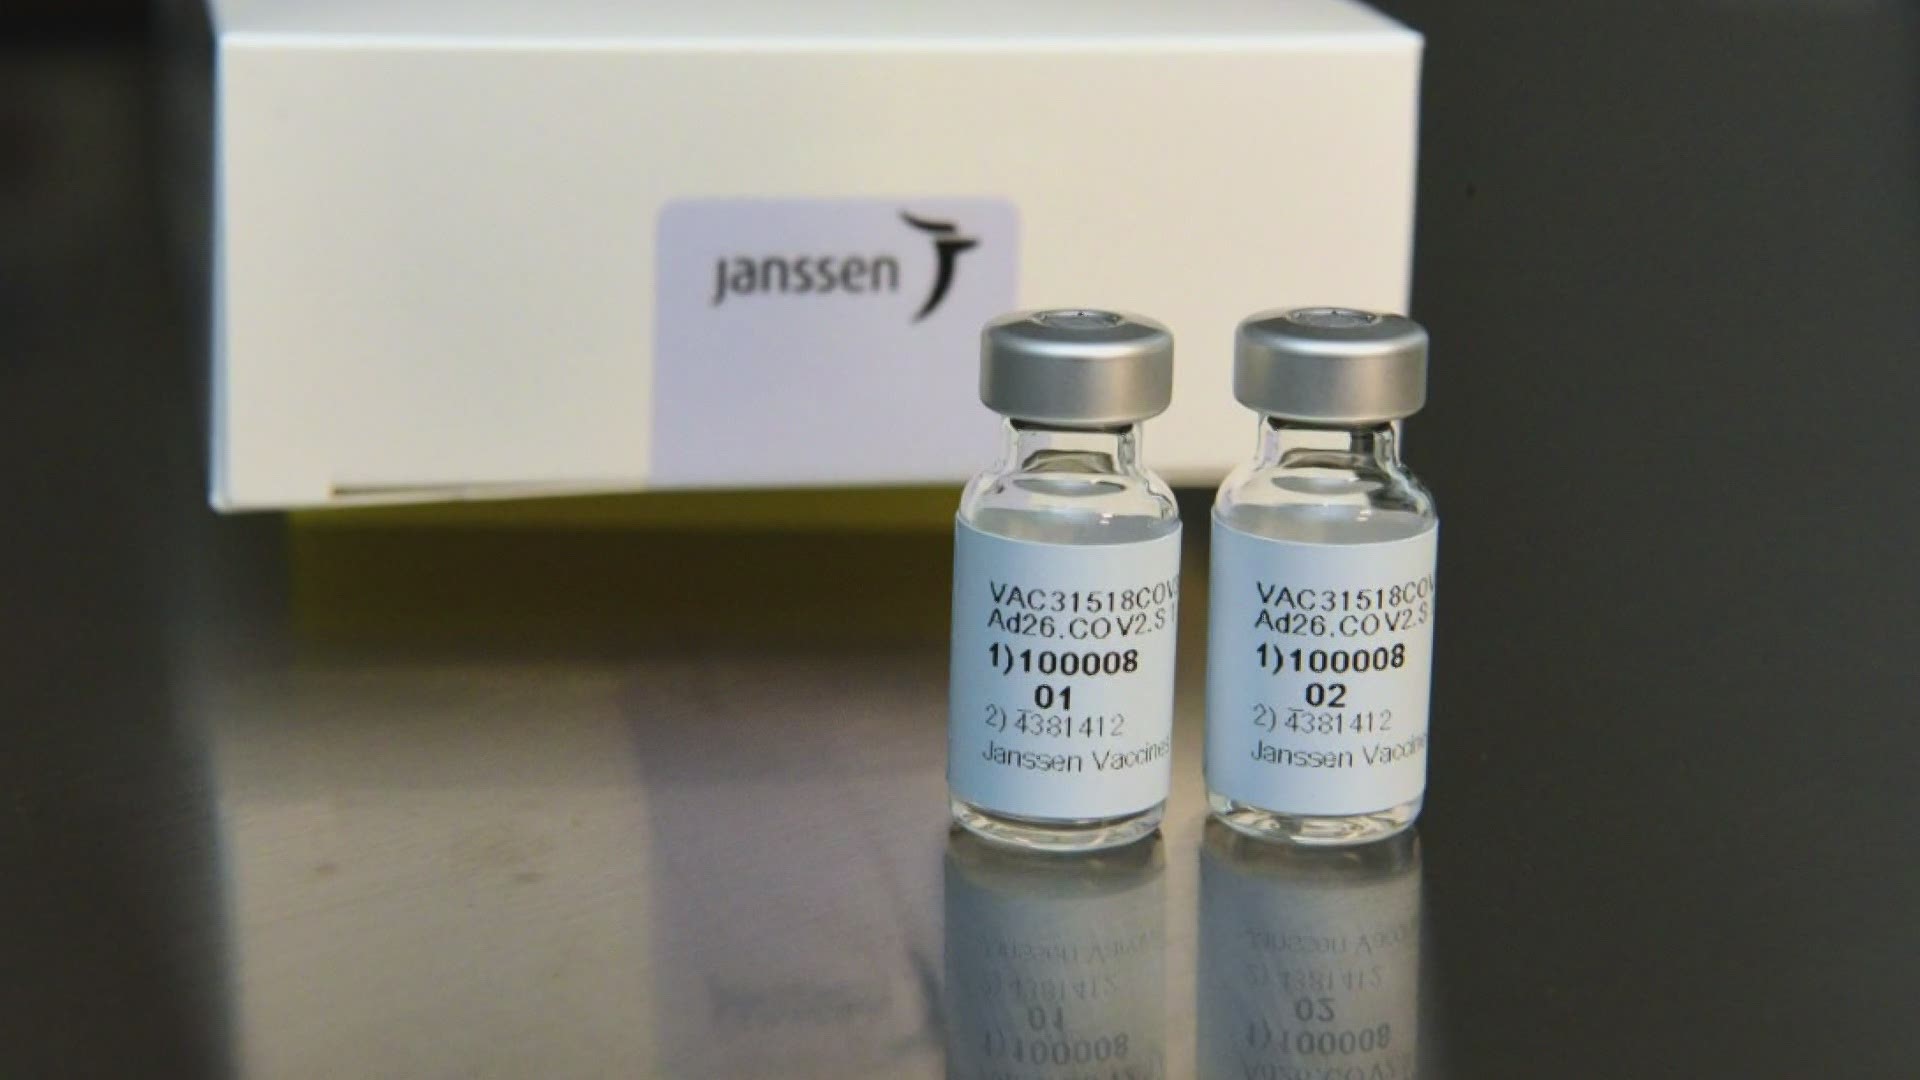 Scientists at the FDA say the Johnson and Johnson vaccine is safe and effective.